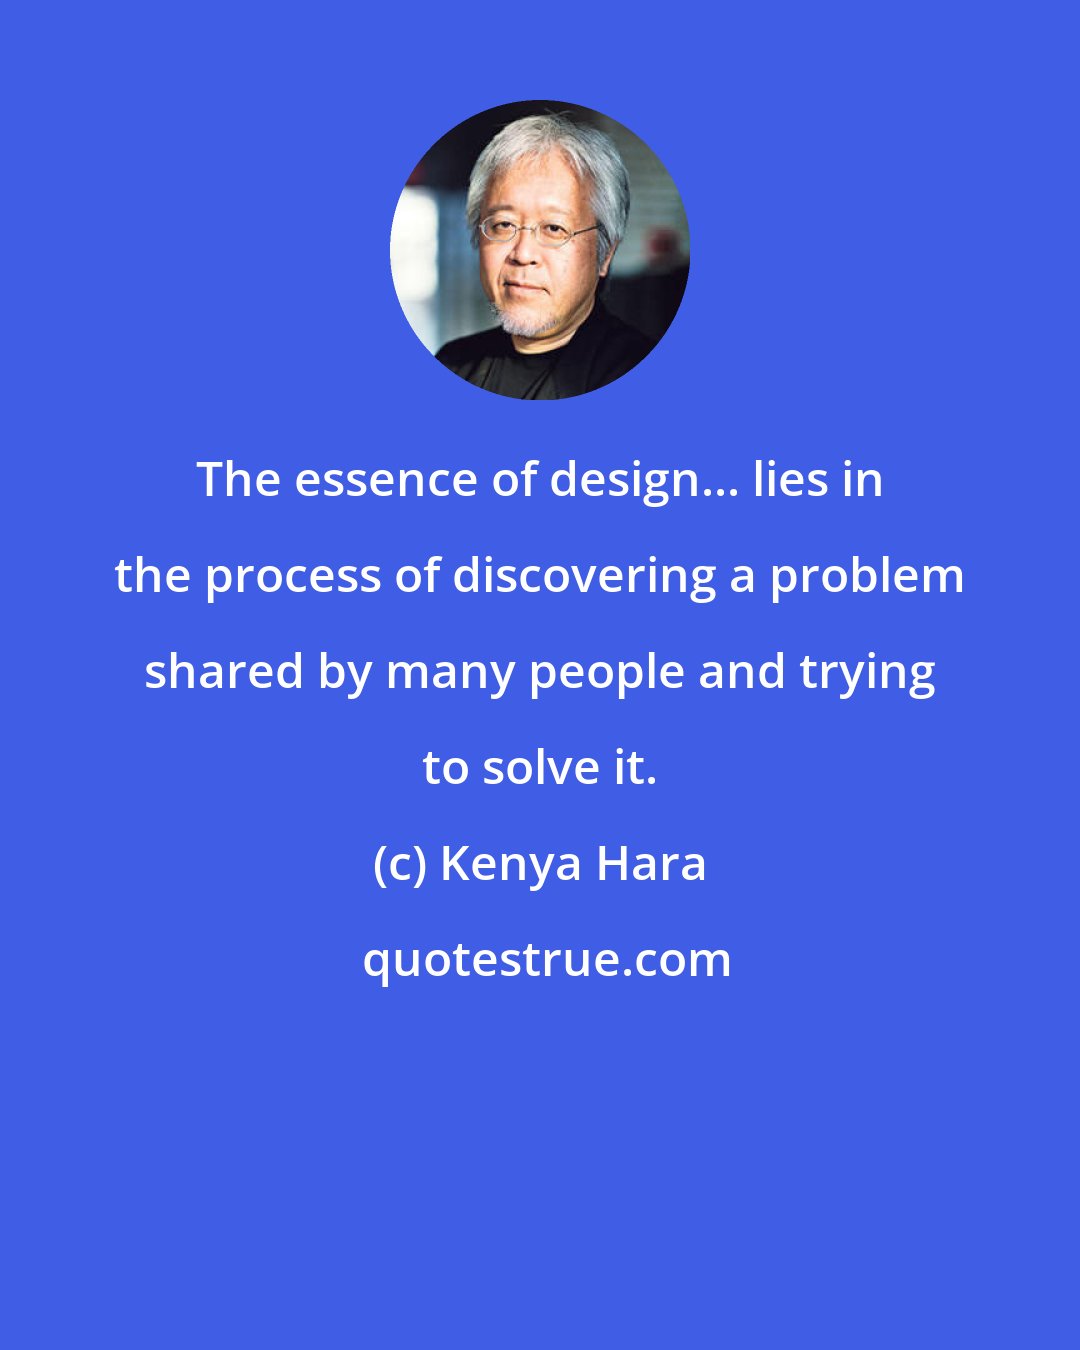 Kenya Hara: The essence of design... lies in the process of discovering a problem shared by many people and trying to solve it.